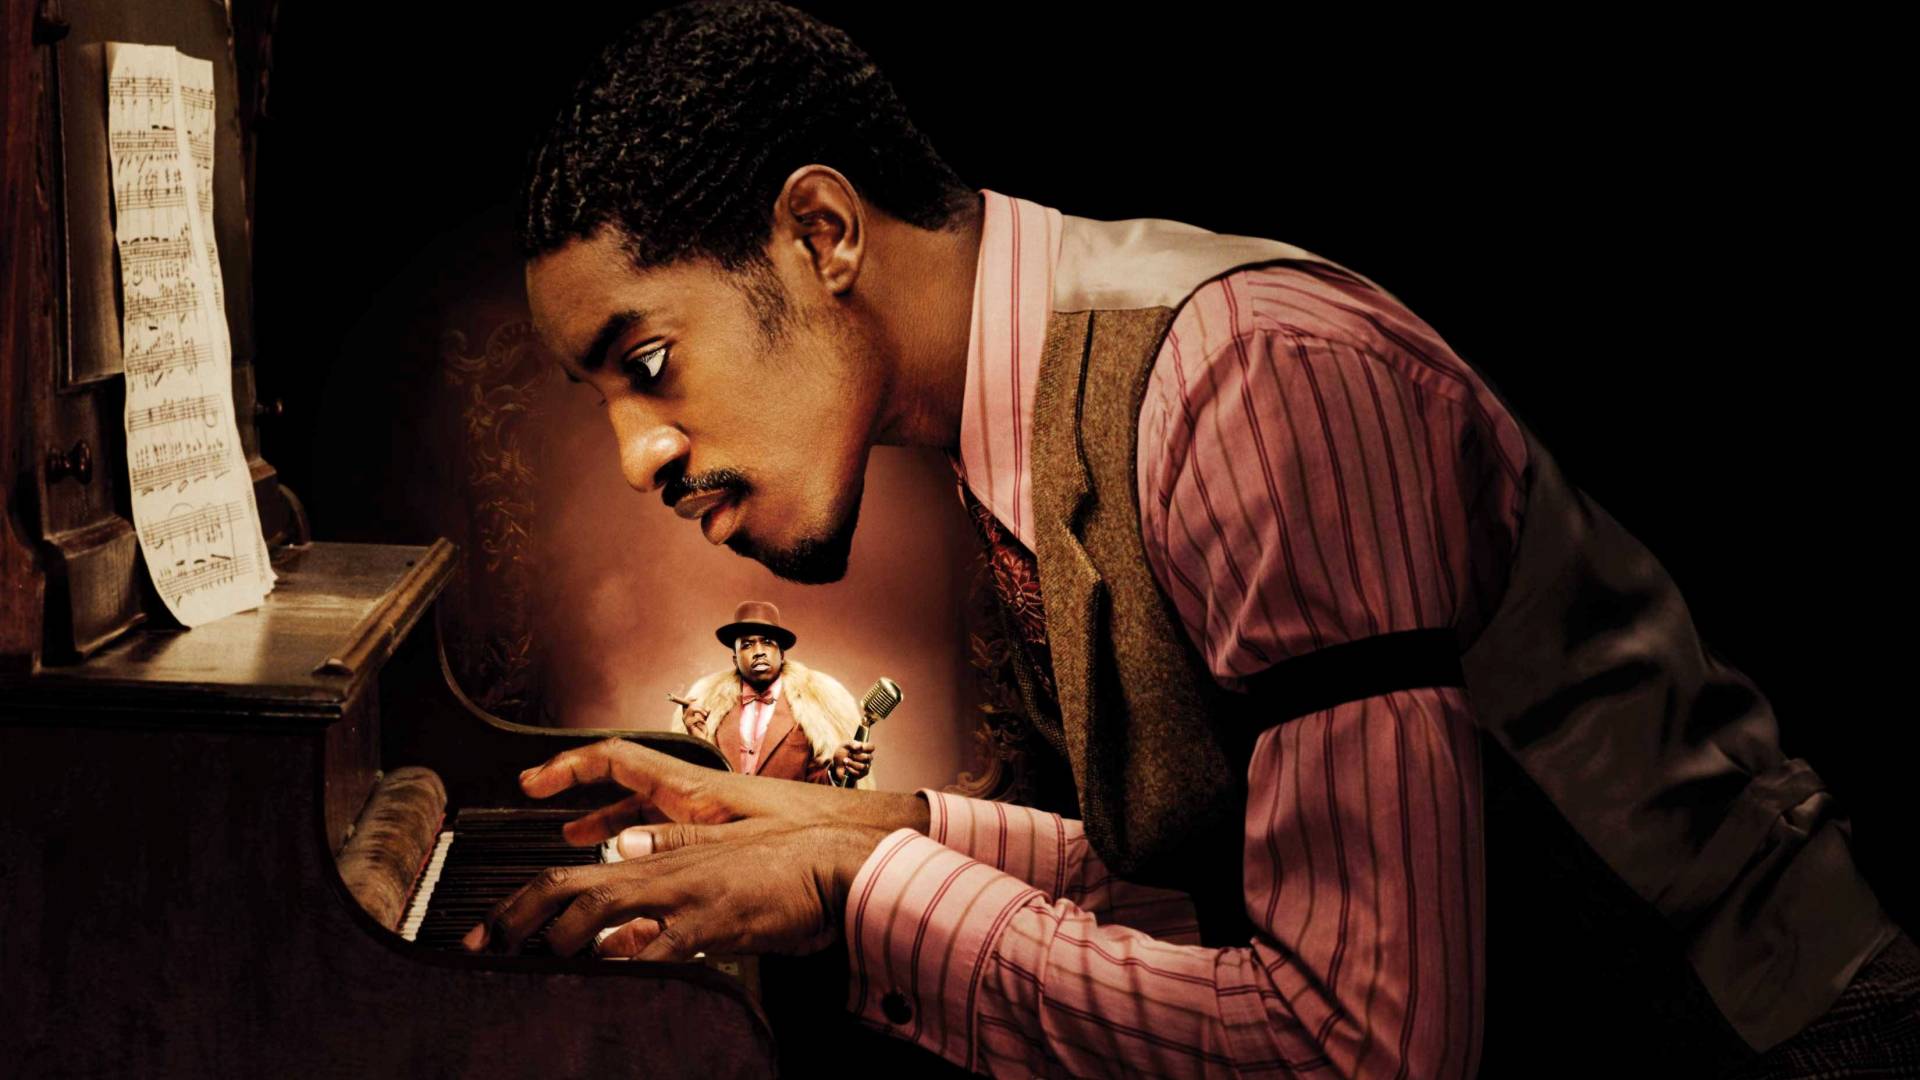 Music Andre 3000 HD Wallpaper | Background Image